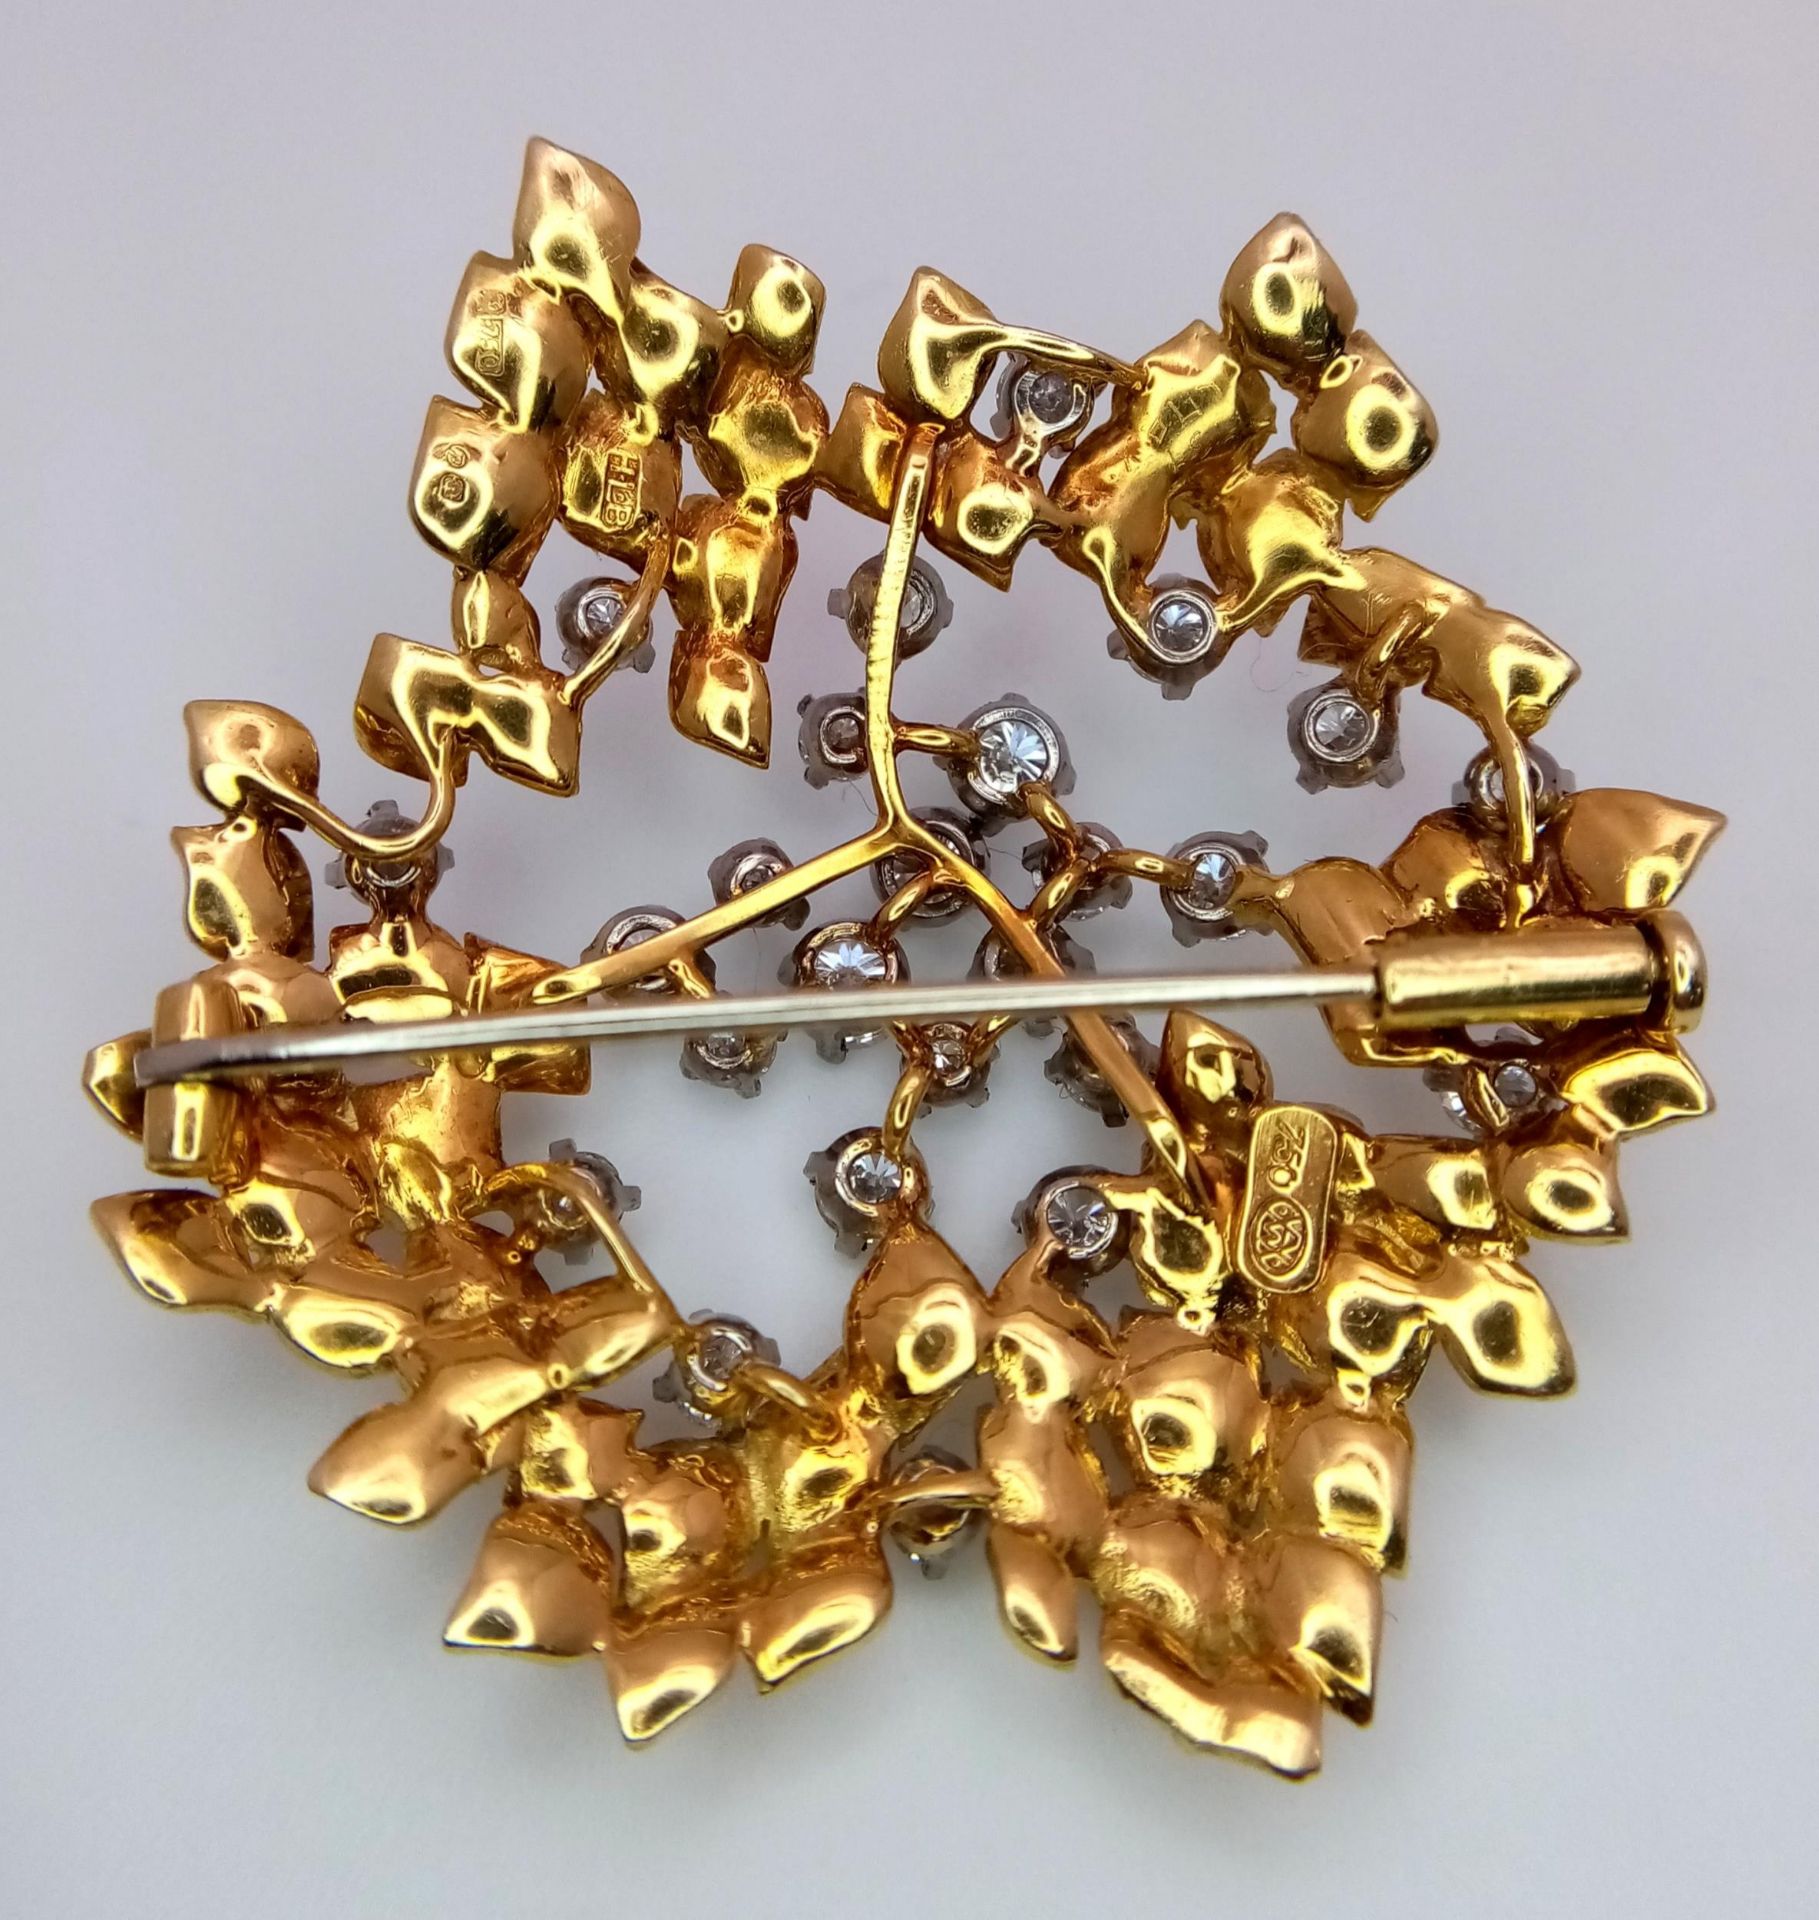 A Magical 18K Yellow Gold and Diamond Brooch. 1.5ctw of brilliant round cut diamonds amongst - Image 4 of 7